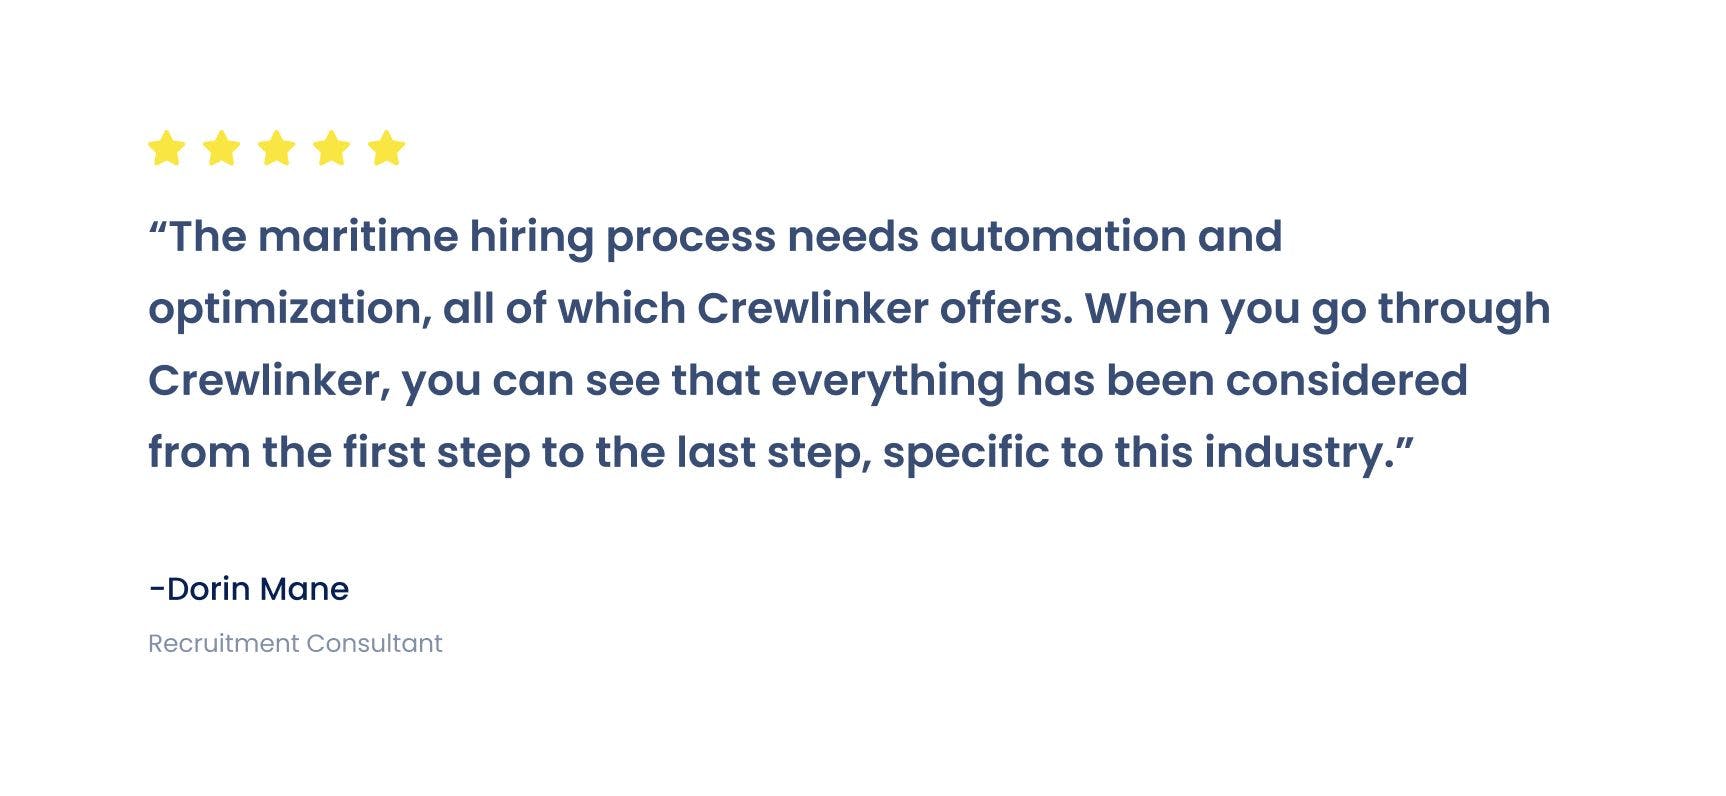 Testimonial automation and optimization in maritime hiring